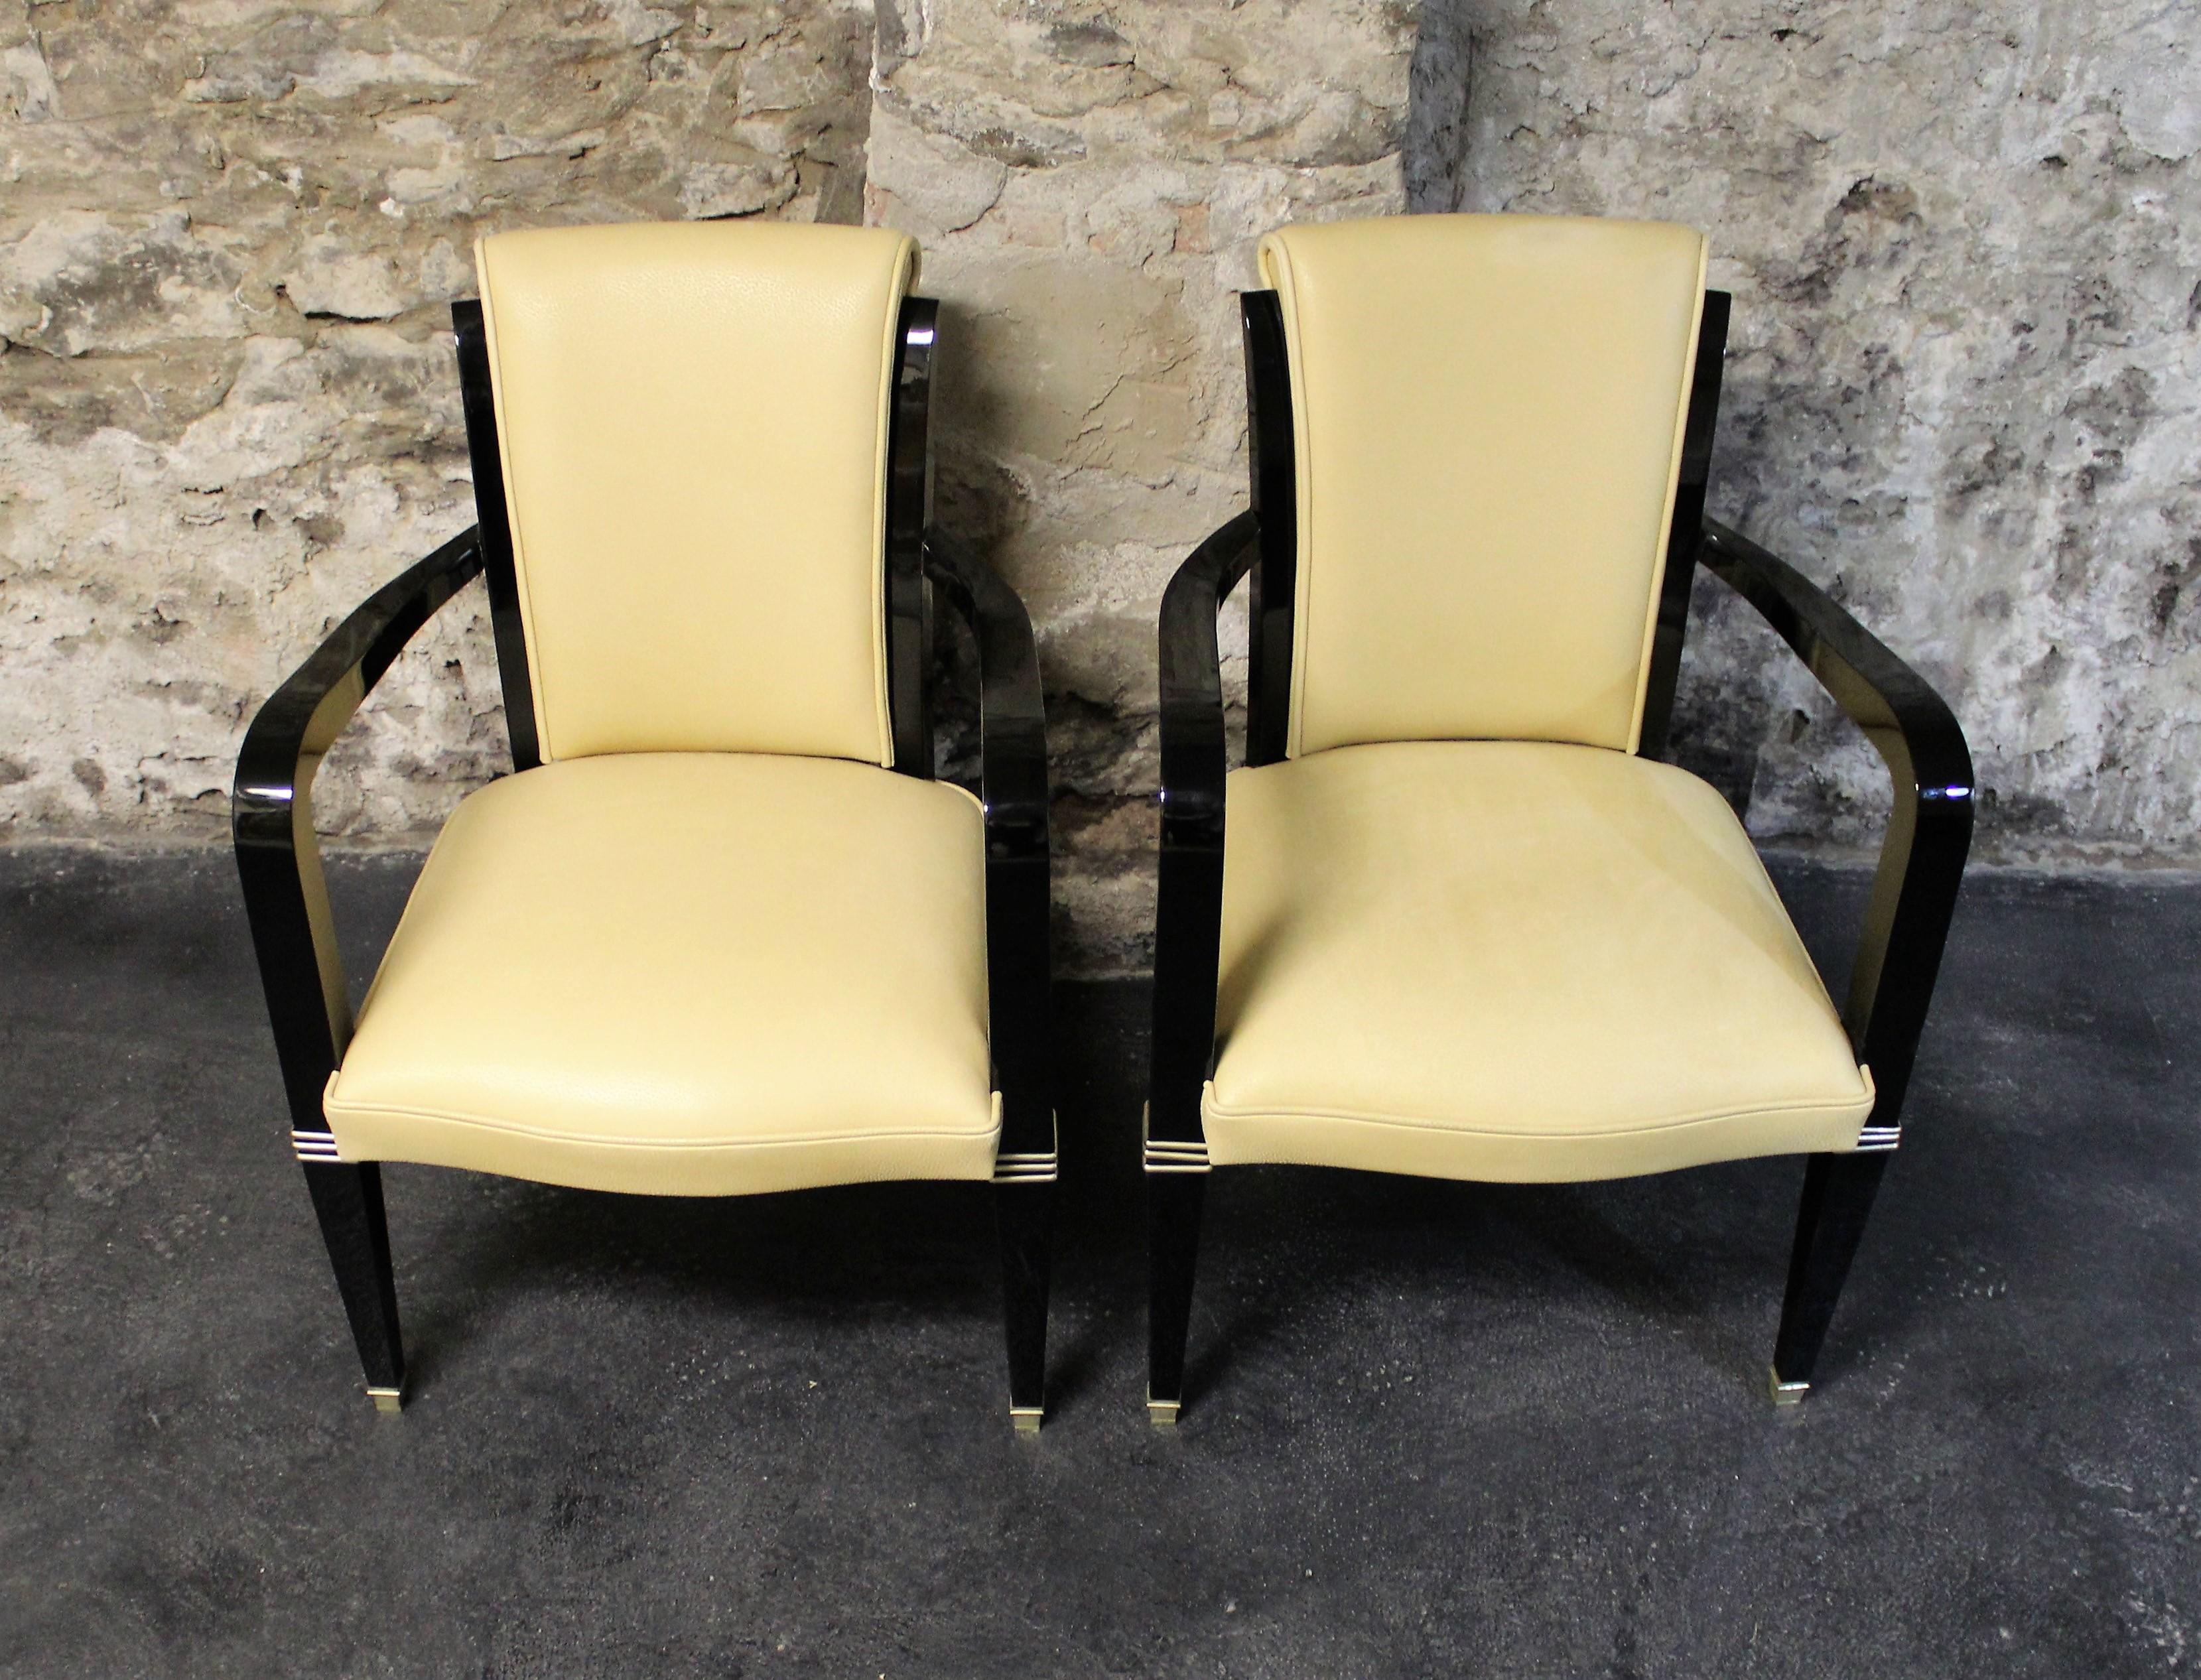 20th Century Pair of Art Deco Leather and Polished Ebonized Frame Armchairs For Sale